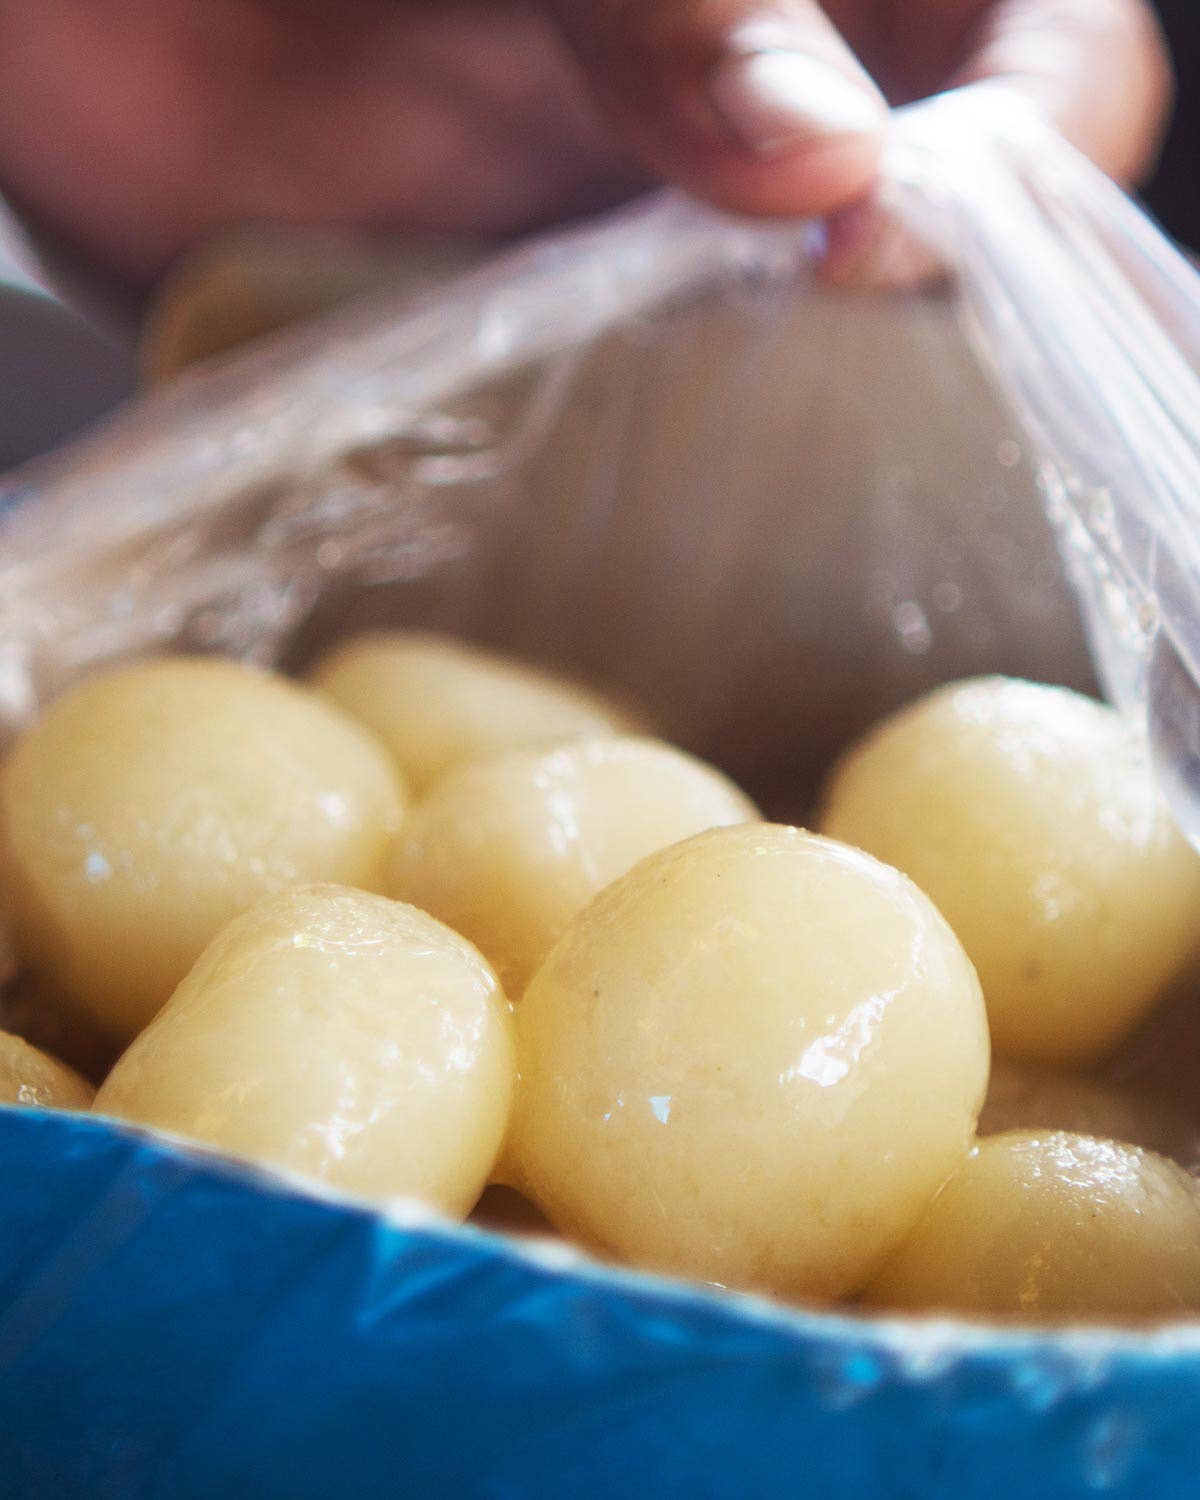 The Fourth-Generation Mishti Master Winning Over Bangladesh’s Insatiable Sweet Tooth